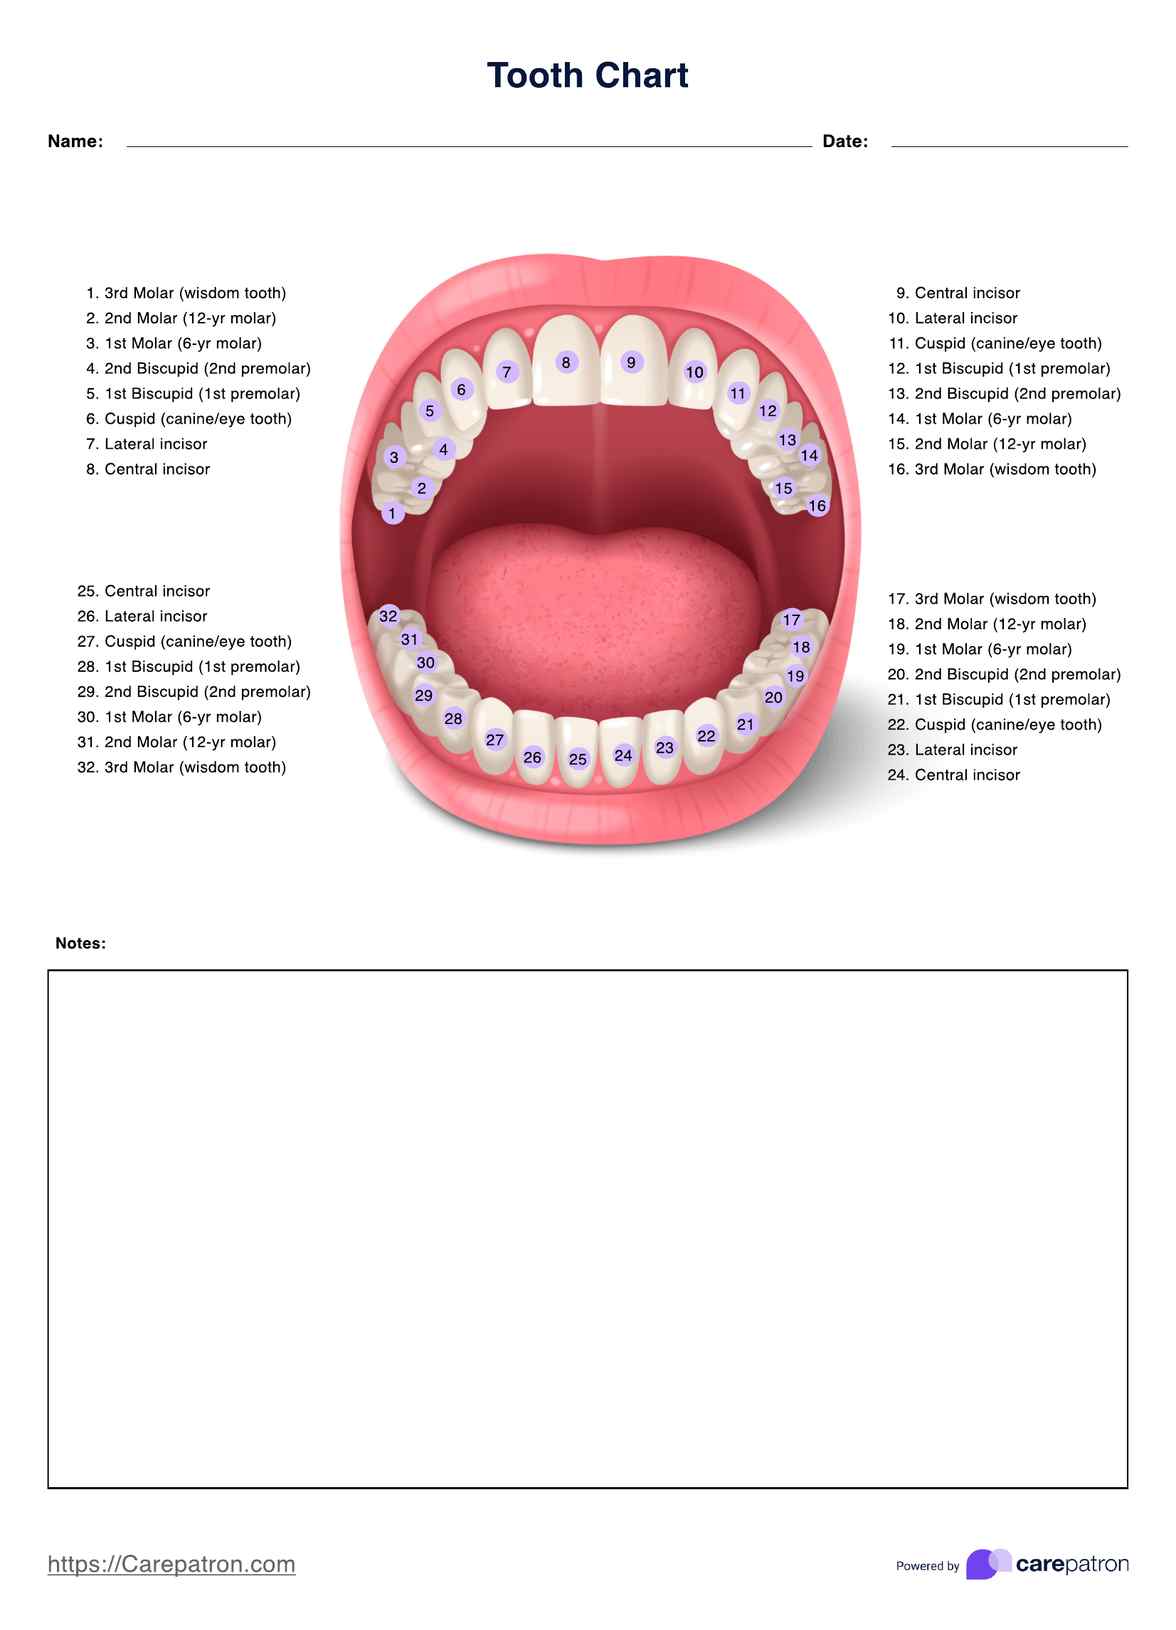 Tooth Charts PDF Example